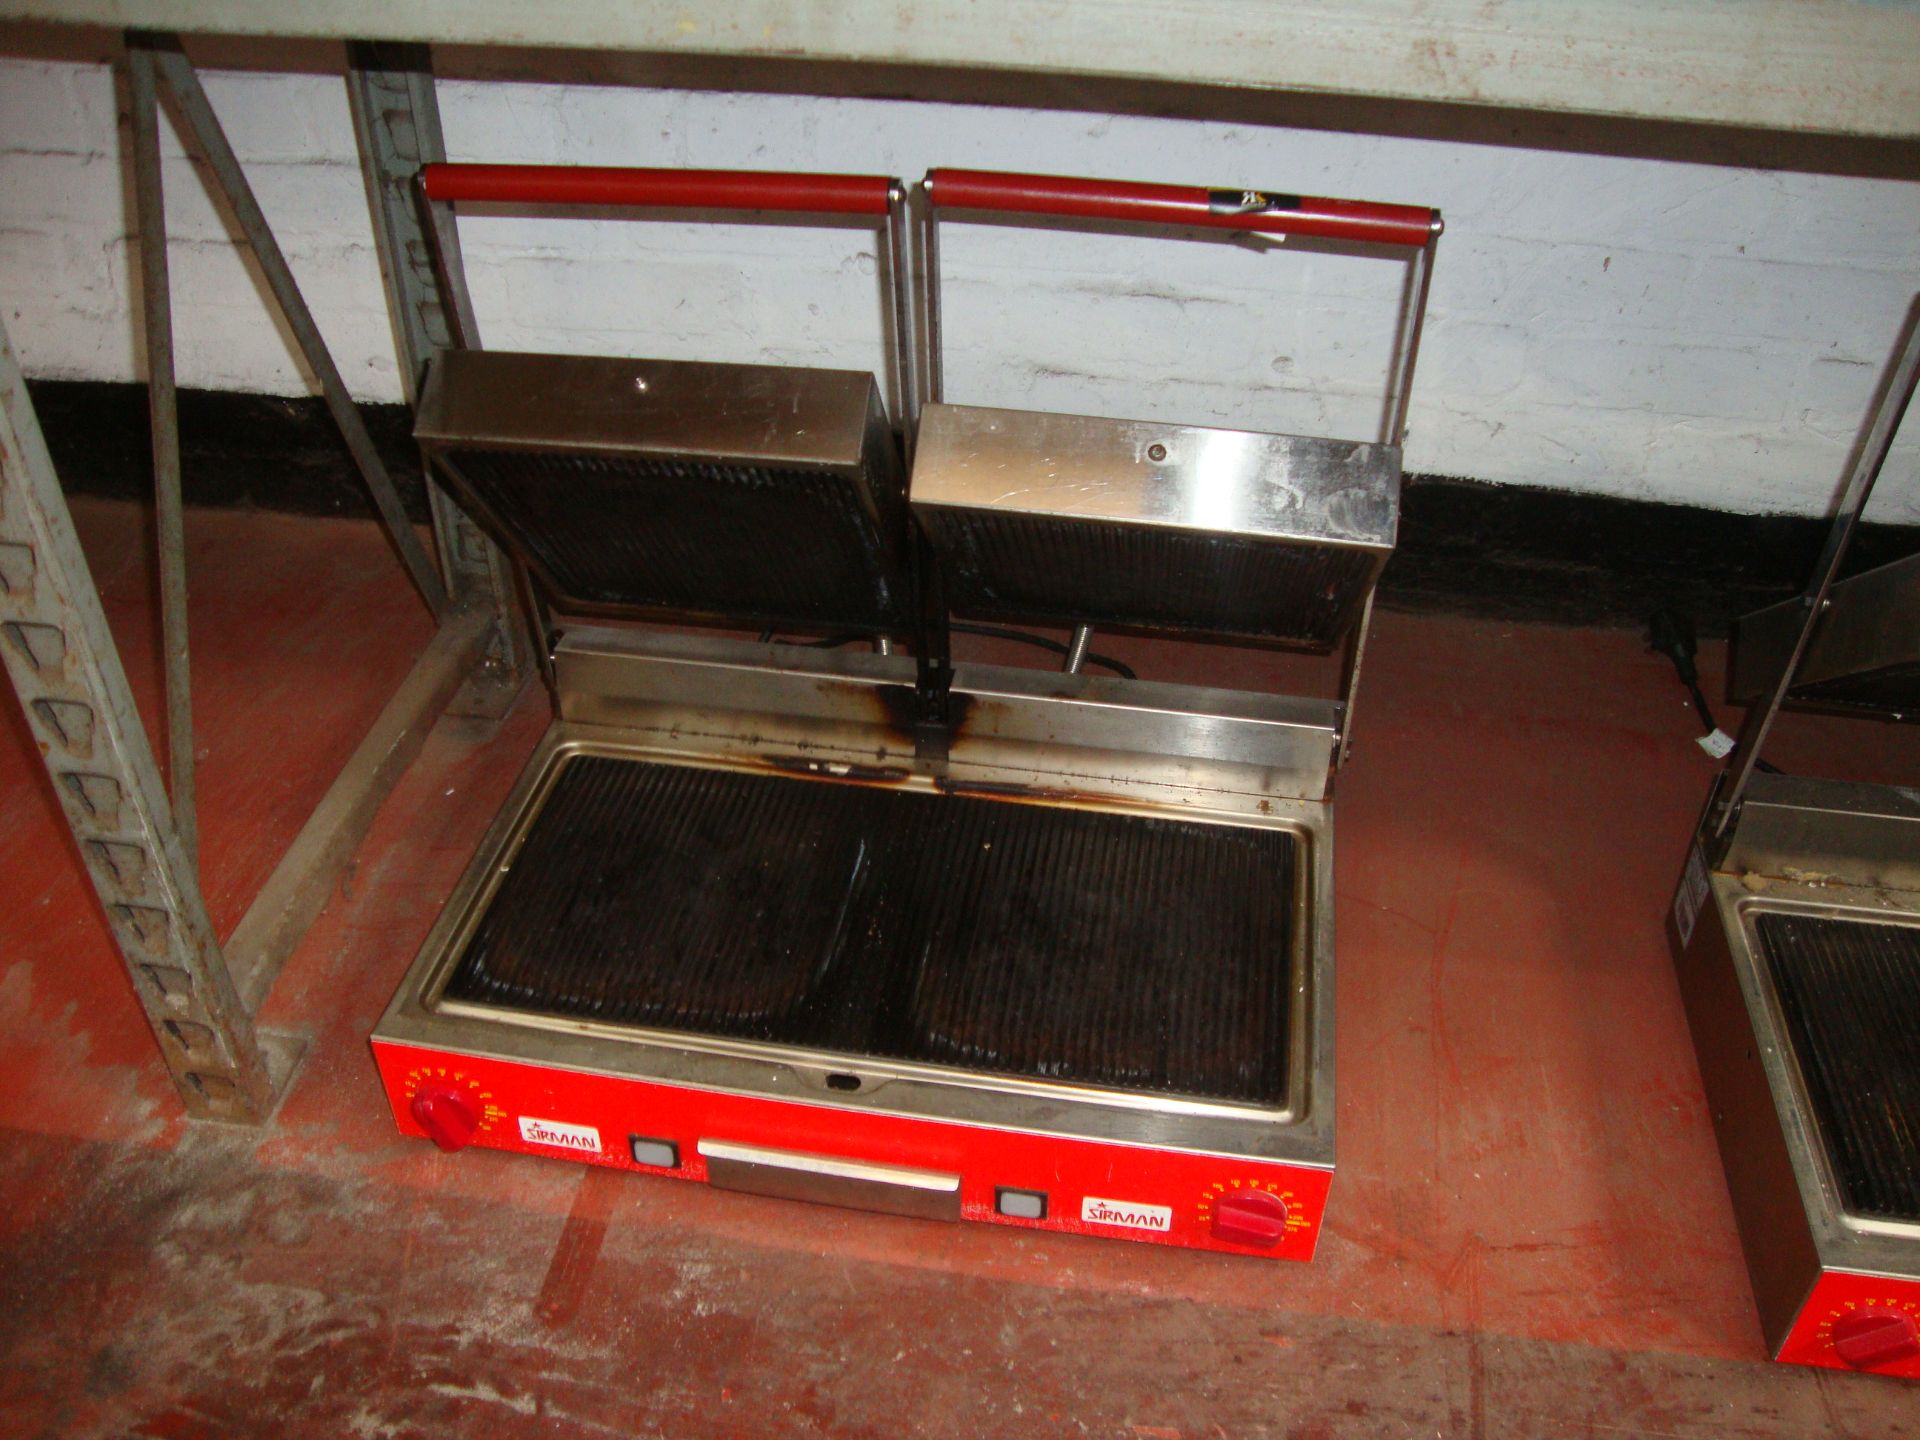 Sirman commercial benchtop twin panini makerIMPORTANT: Please remember goods successfully bid upon - Image 2 of 2